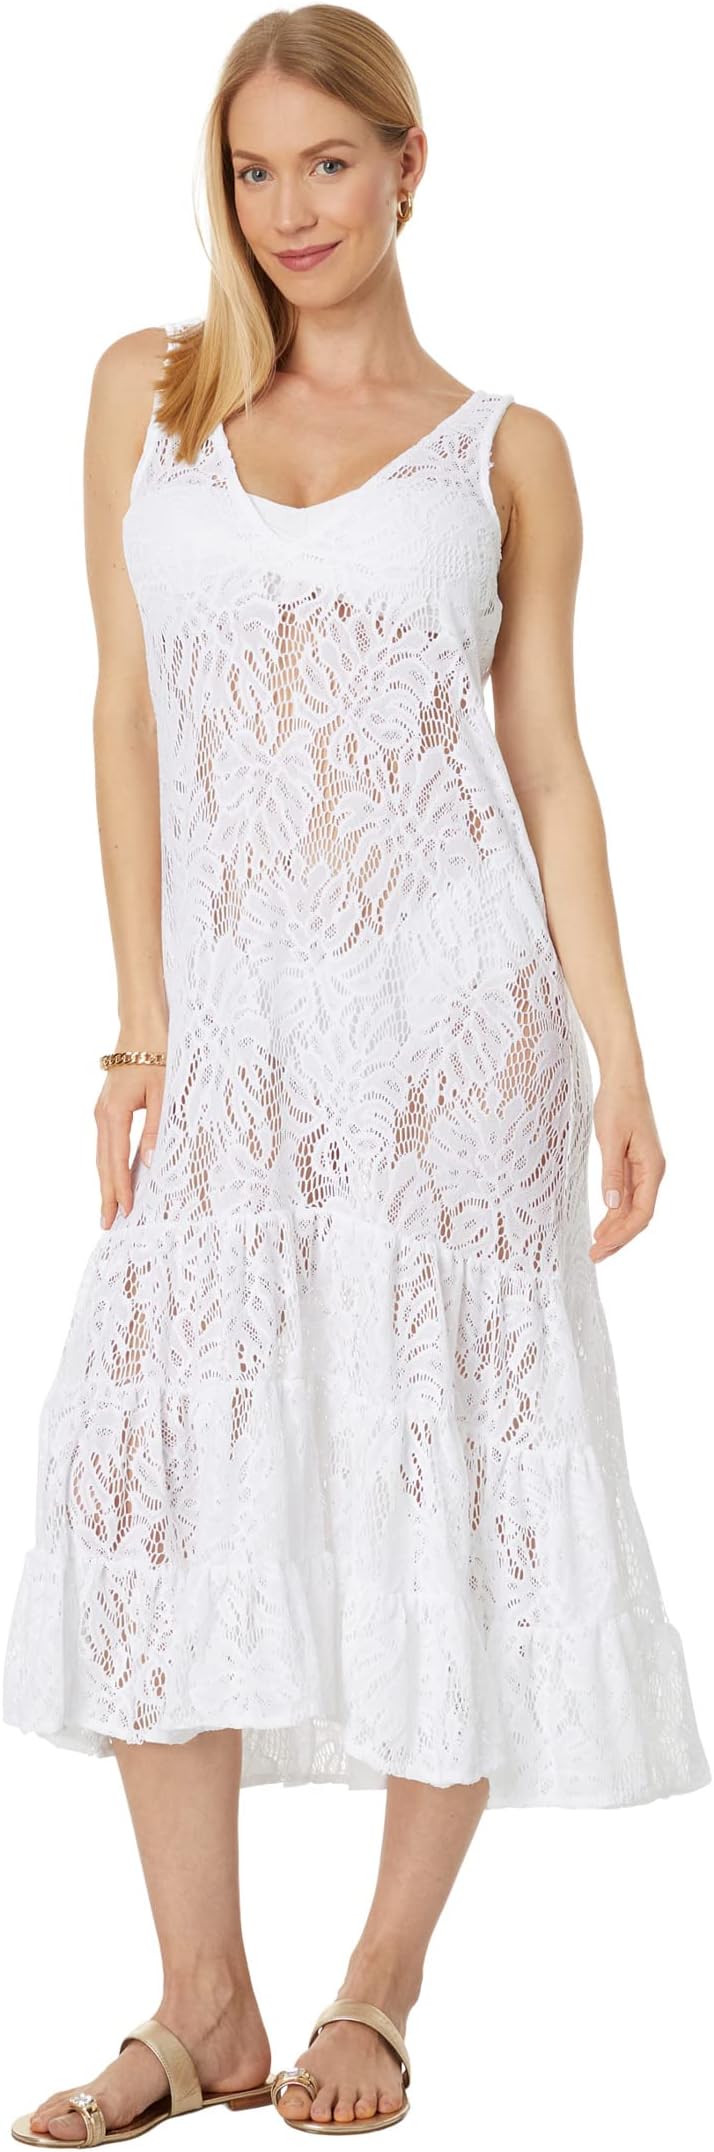 radisson collection paradise resort Накидка Finnley Lace Cover-Up Lilly Pulitzer, цвет Resort White Paradise Found Lace